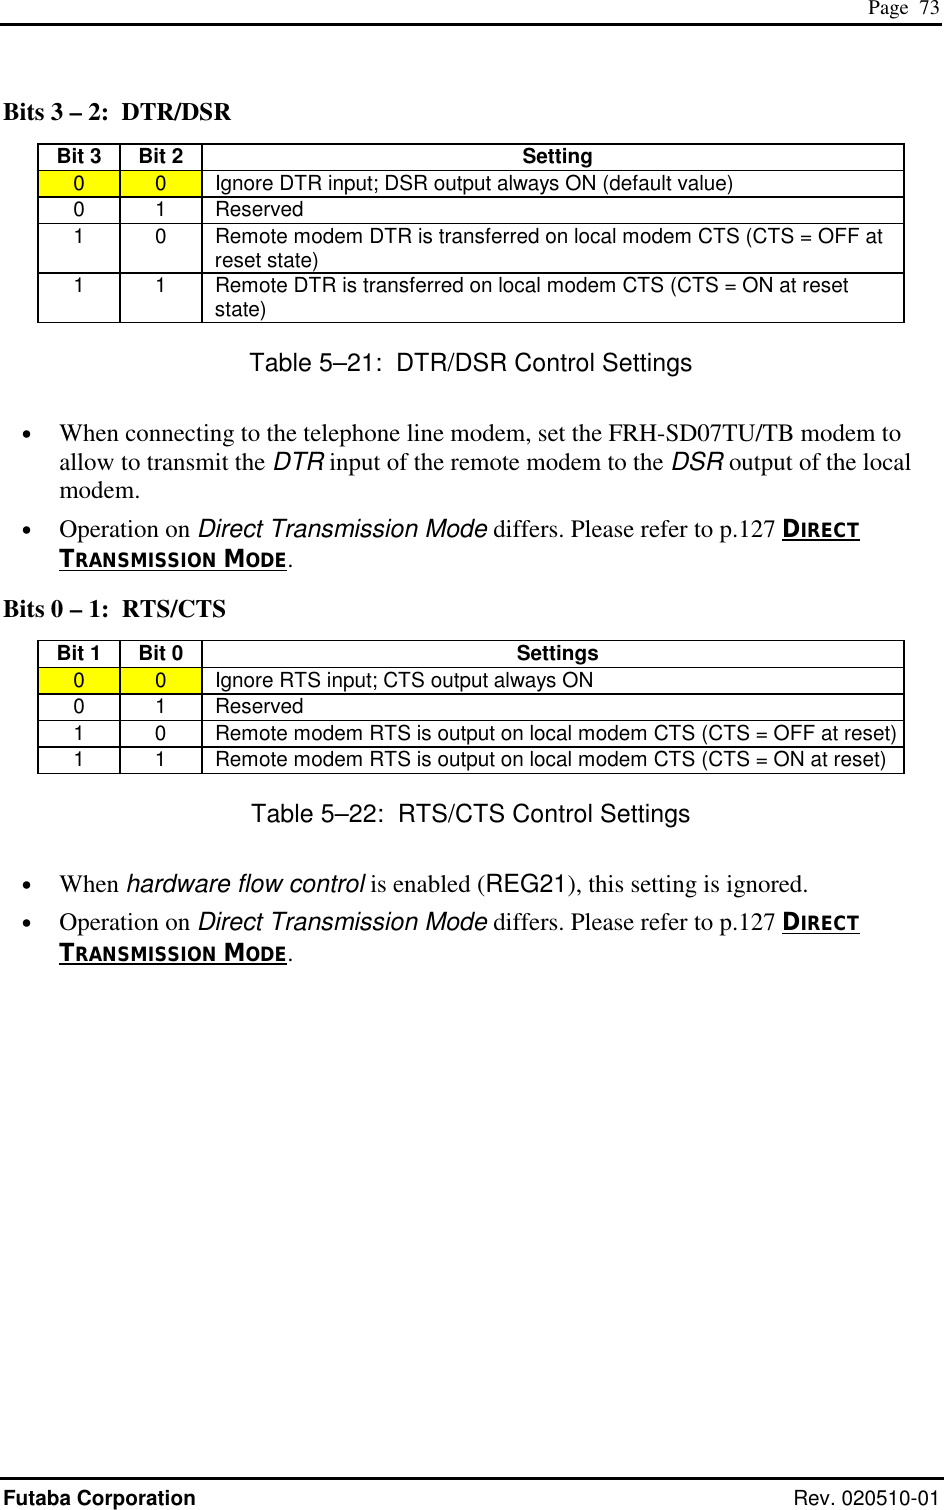  Page  73 Futaba Corporation Rev. 020510-01 Bits 3 – 2:  DTR/DSR Bit 3  Bit 2    Setting 0  0   Ignore DTR input; DSR output always ON (default value) 0 1  Reserved 1  0   Remote modem DTR is transferred on local modem CTS (CTS = OFF at reset state) 1  1   Remote DTR is transferred on local modem CTS (CTS = ON at reset state) Table 5–21:  DTR/DSR Control Settings •  When connecting to the telephone line modem, set the FRH-SD07TU/TB modem to allow to transmit the DTR input of the remote modem to the DSR output of the local modem. •  Operation on Direct Transmission Mode differs. Please refer to p.127 DIRECT TRANSMISSION MODE. Bits 0 – 1:  RTS/CTS Bit 1  Bit 0    Settings 0  0   Ignore RTS input; CTS output always ON 0 1  Reserved 1  0   Remote modem RTS is output on local modem CTS (CTS = OFF at reset) 1  1   Remote modem RTS is output on local modem CTS (CTS = ON at reset) Table 5–22:  RTS/CTS Control Settings •  When hardware flow control is enabled (REG21), this setting is ignored. •  Operation on Direct Transmission Mode differs. Please refer to p.127 DIRECT TRANSMISSION MODE. 